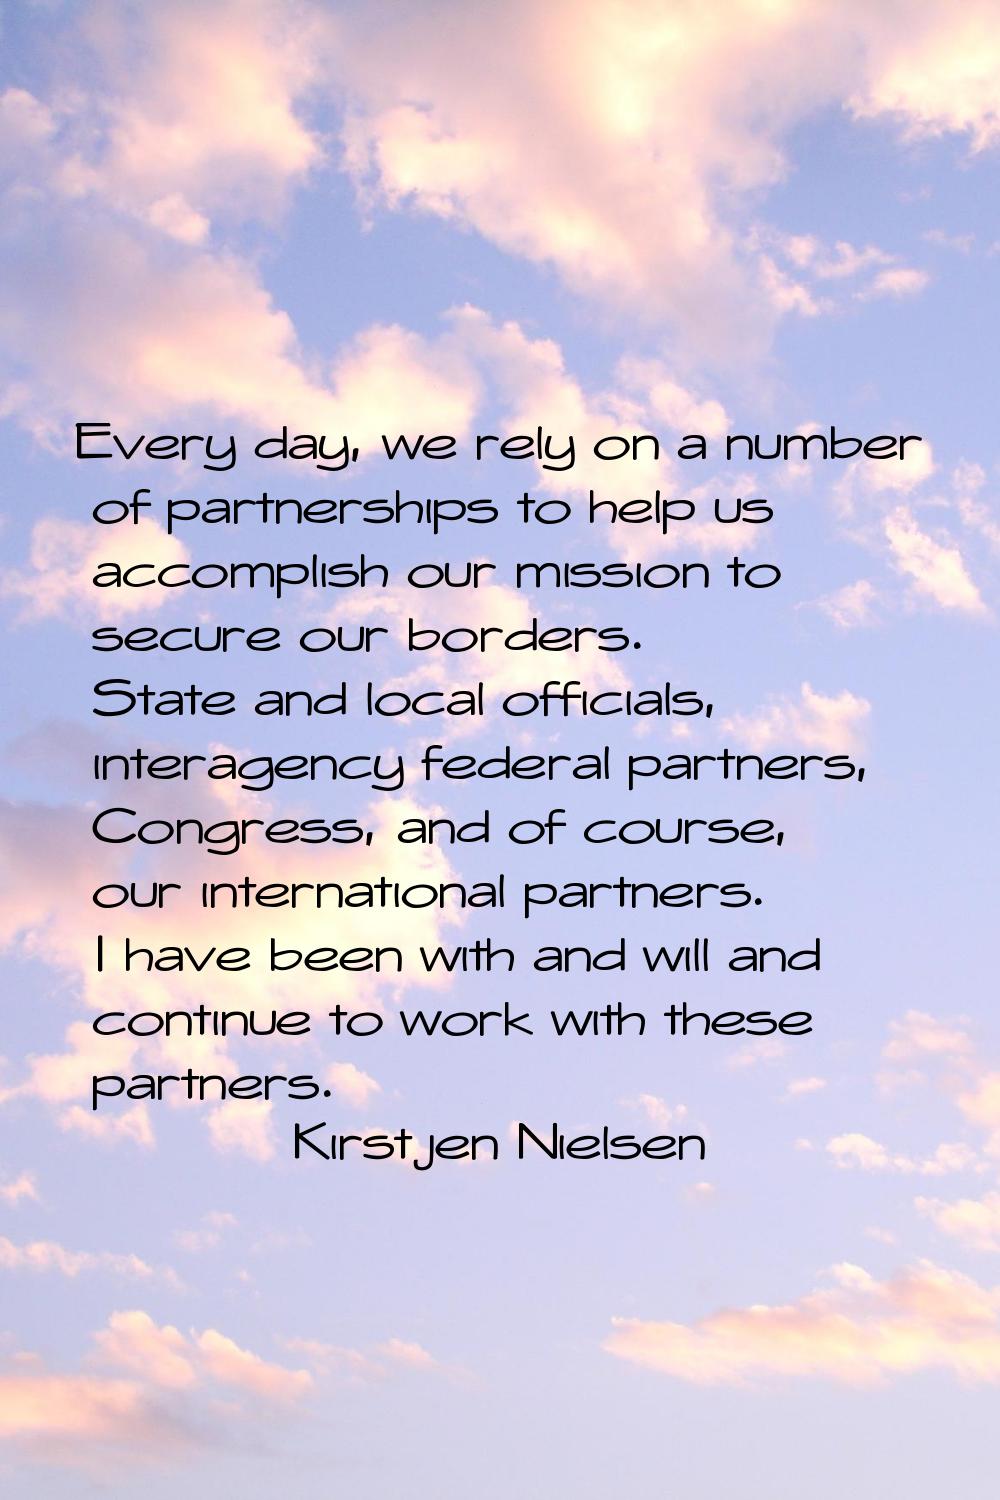 Every day, we rely on a number of partnerships to help us accomplish our mission to secure our bord